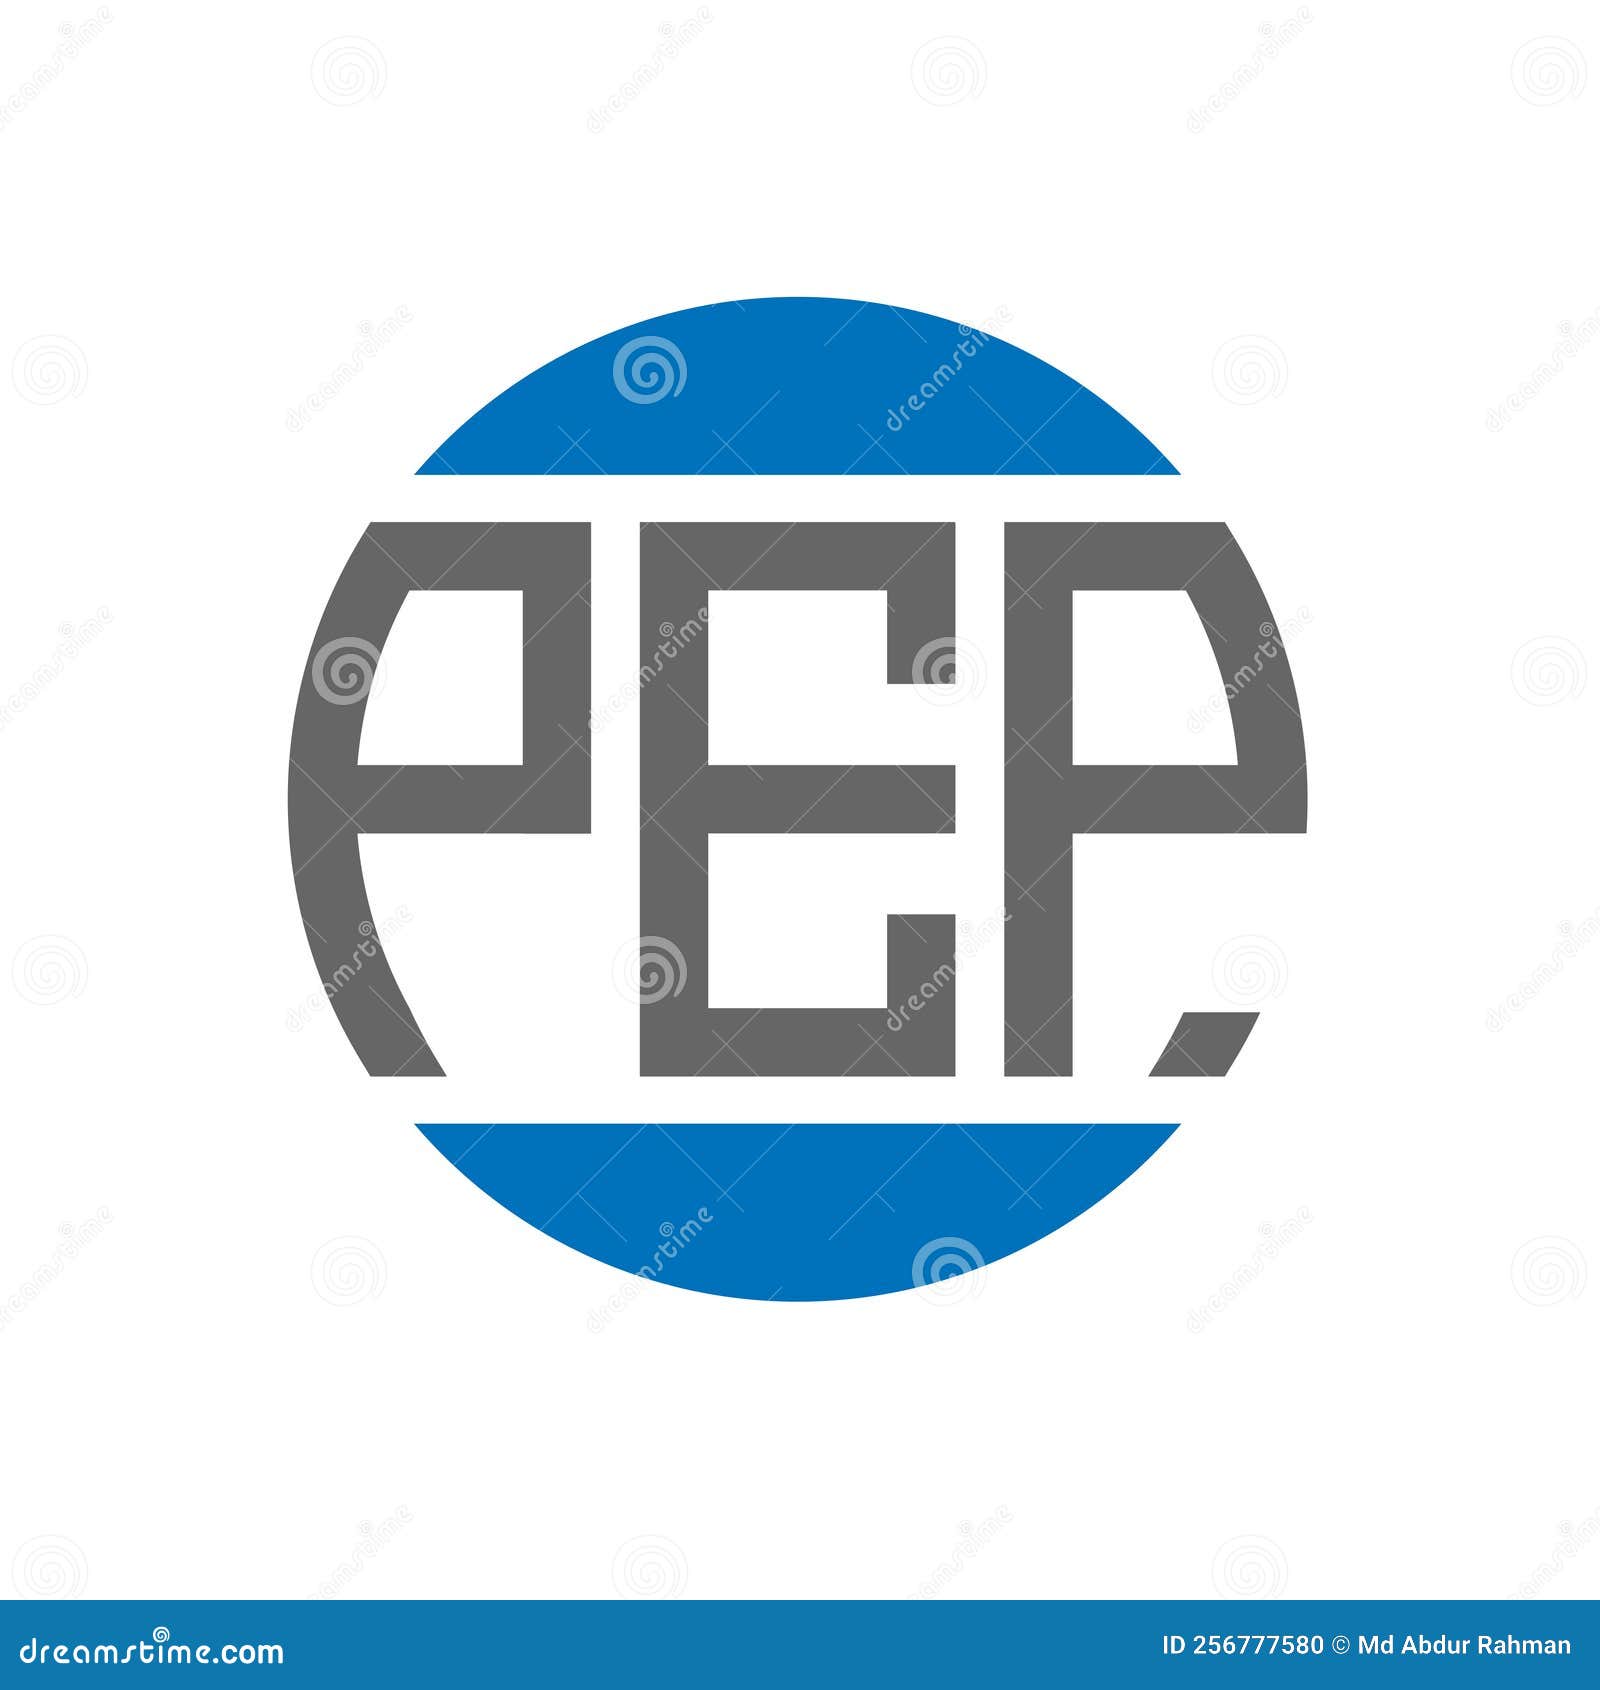 pep letter logo  on white background. pep creative initials circle logo concept. pep letter 